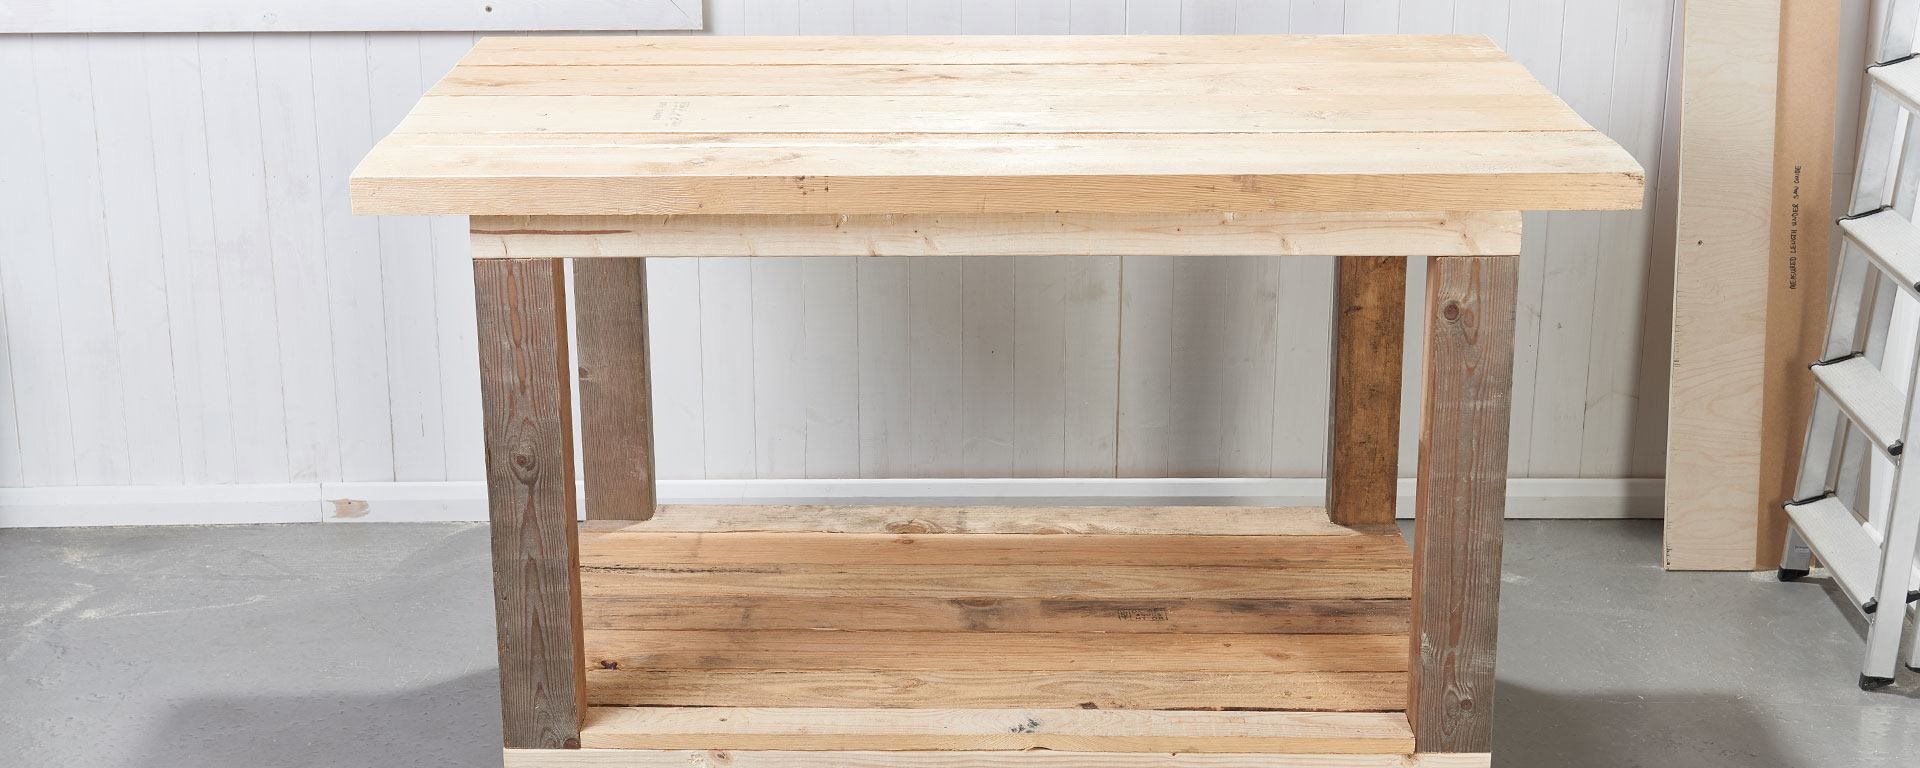 How To Make A Workbench From Reclaimed Wood